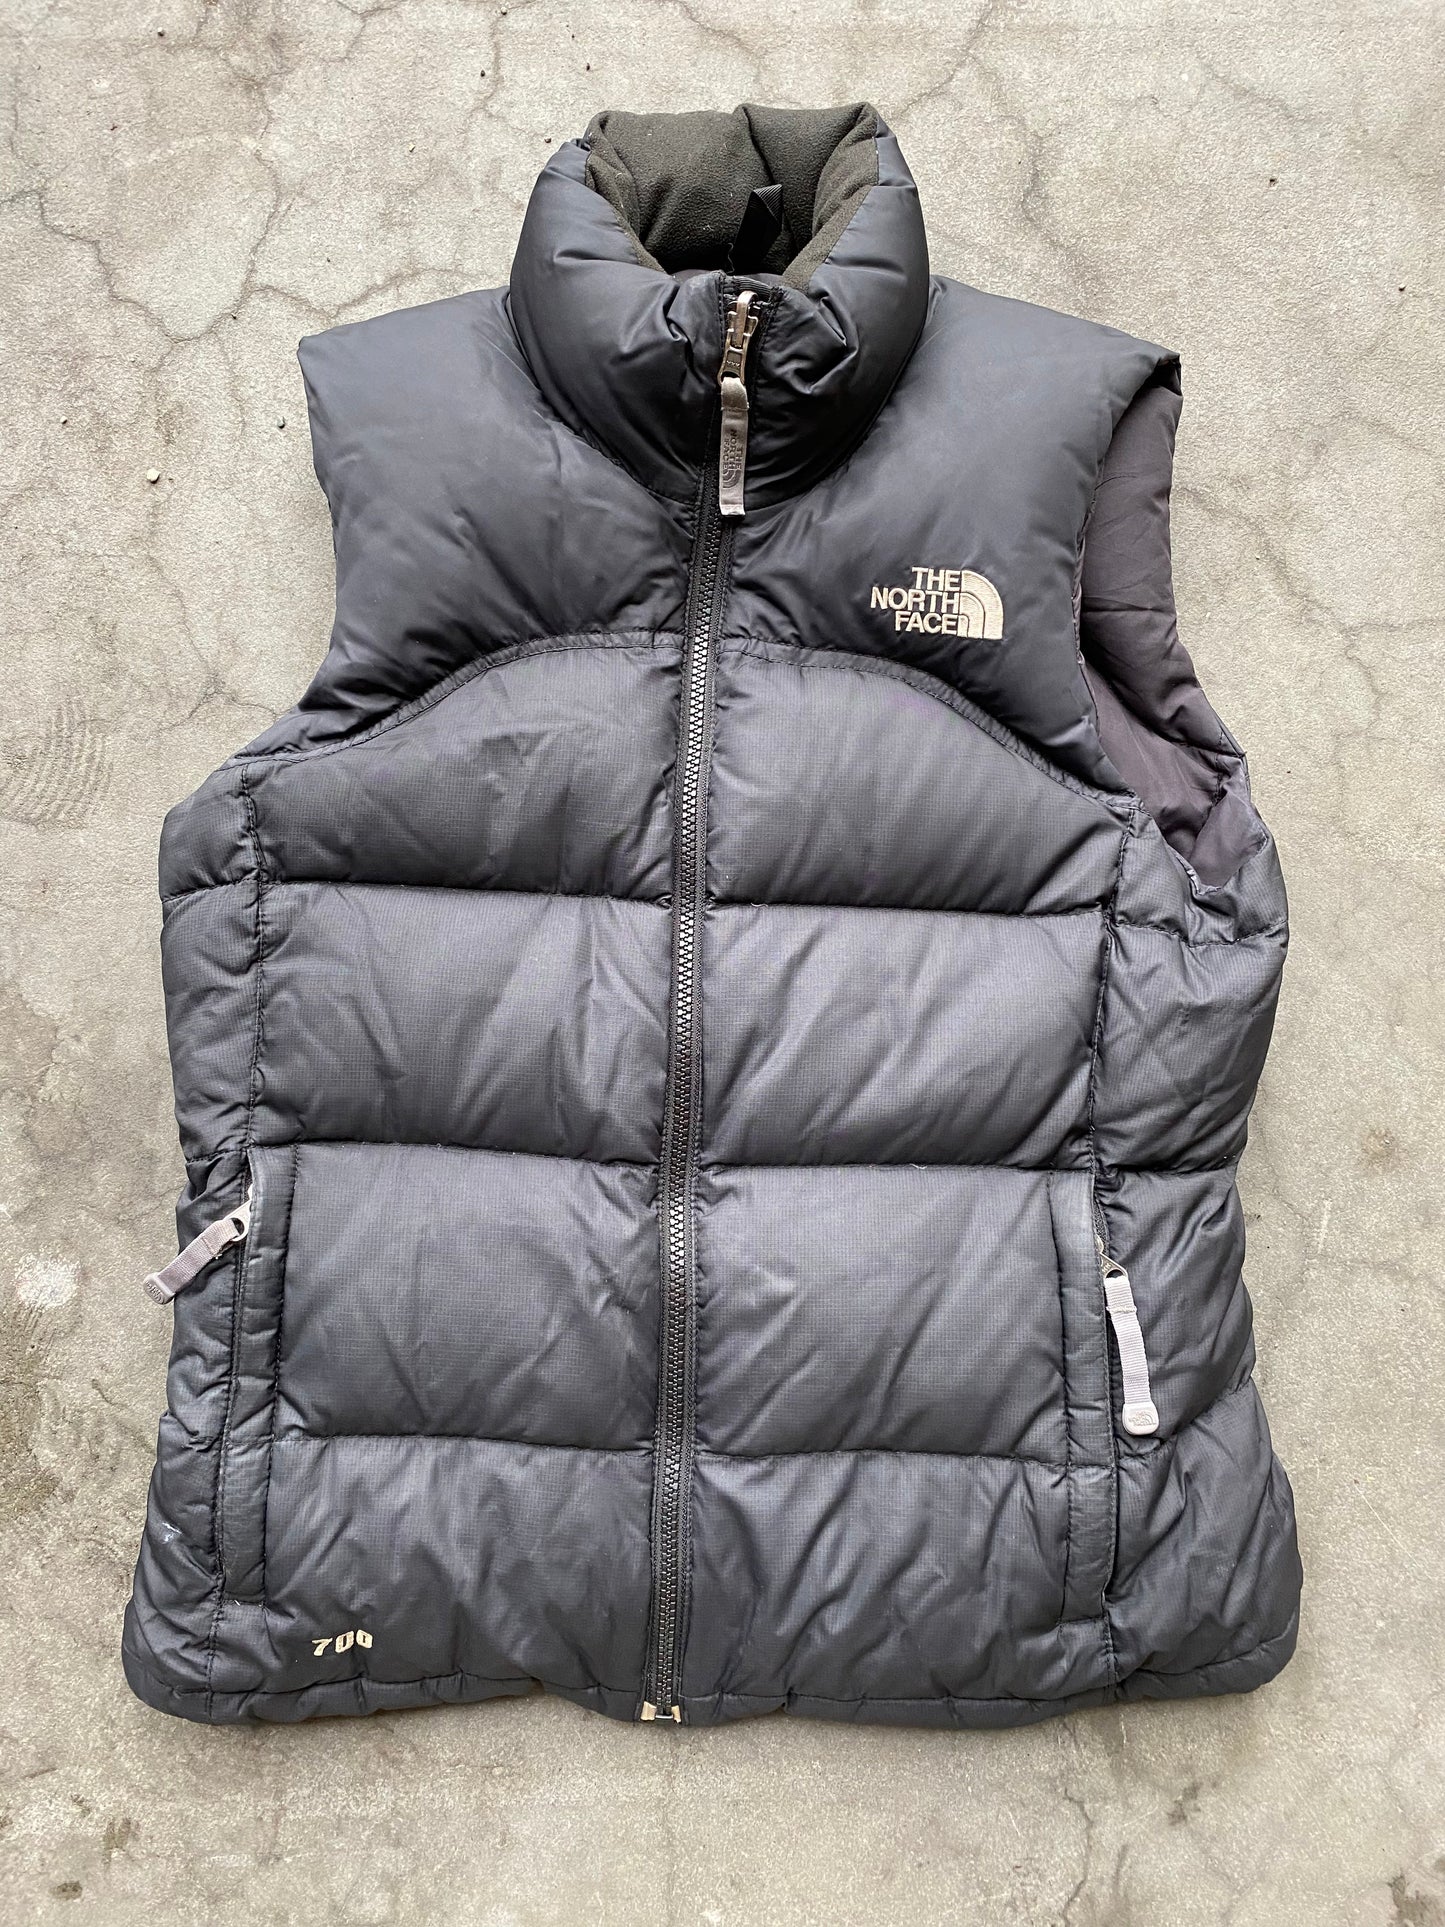 (XS) The North Face 700 Vest